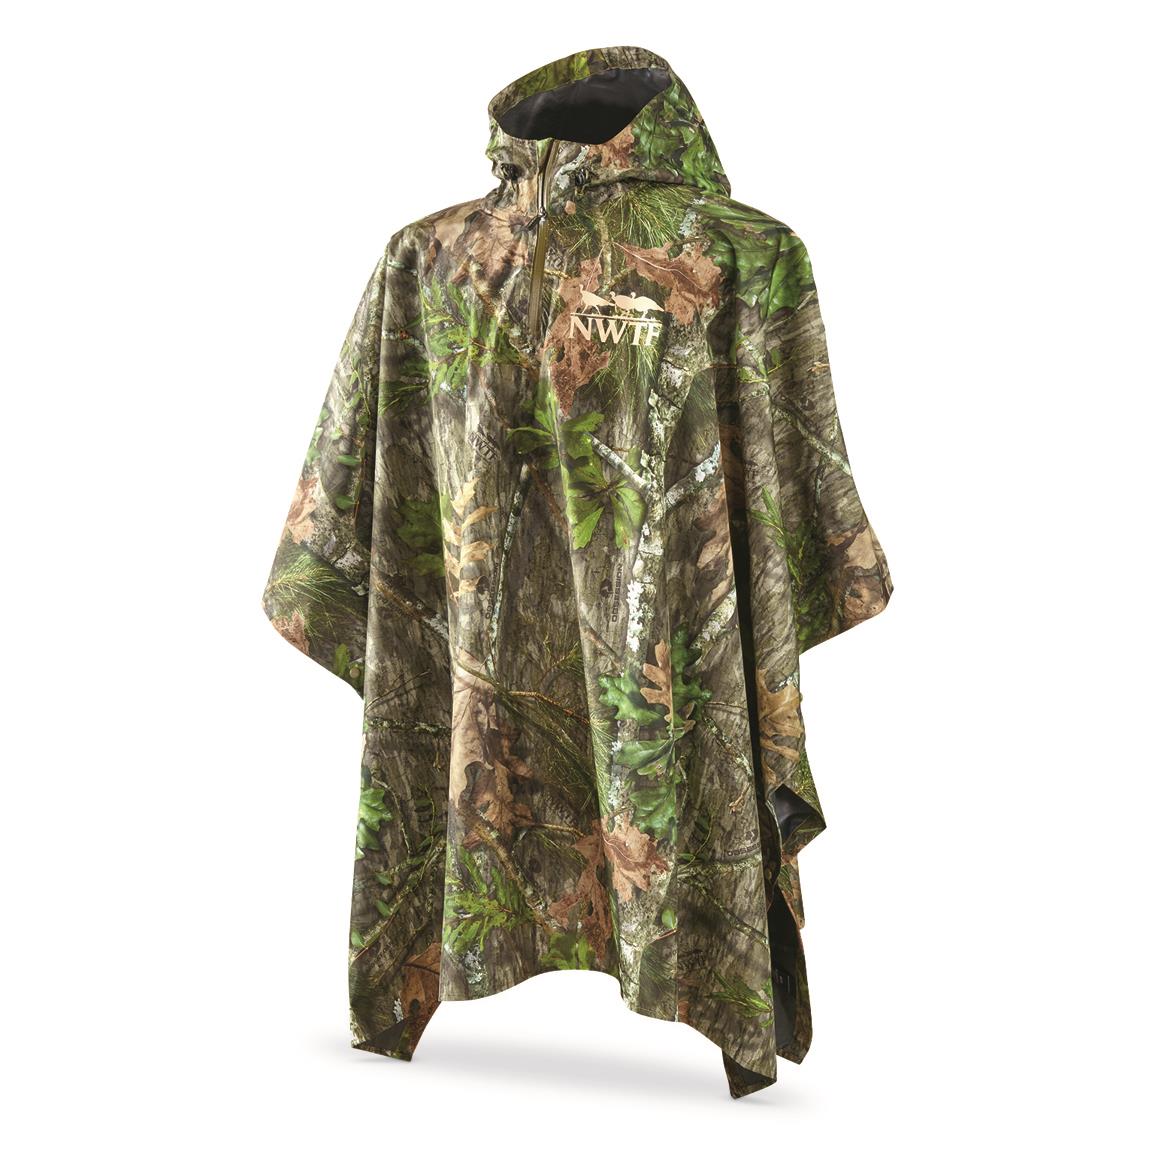 NOMAD NWTF Poncho - 707808, Camo Rain Gear & Jackets at Sportsman's Guide